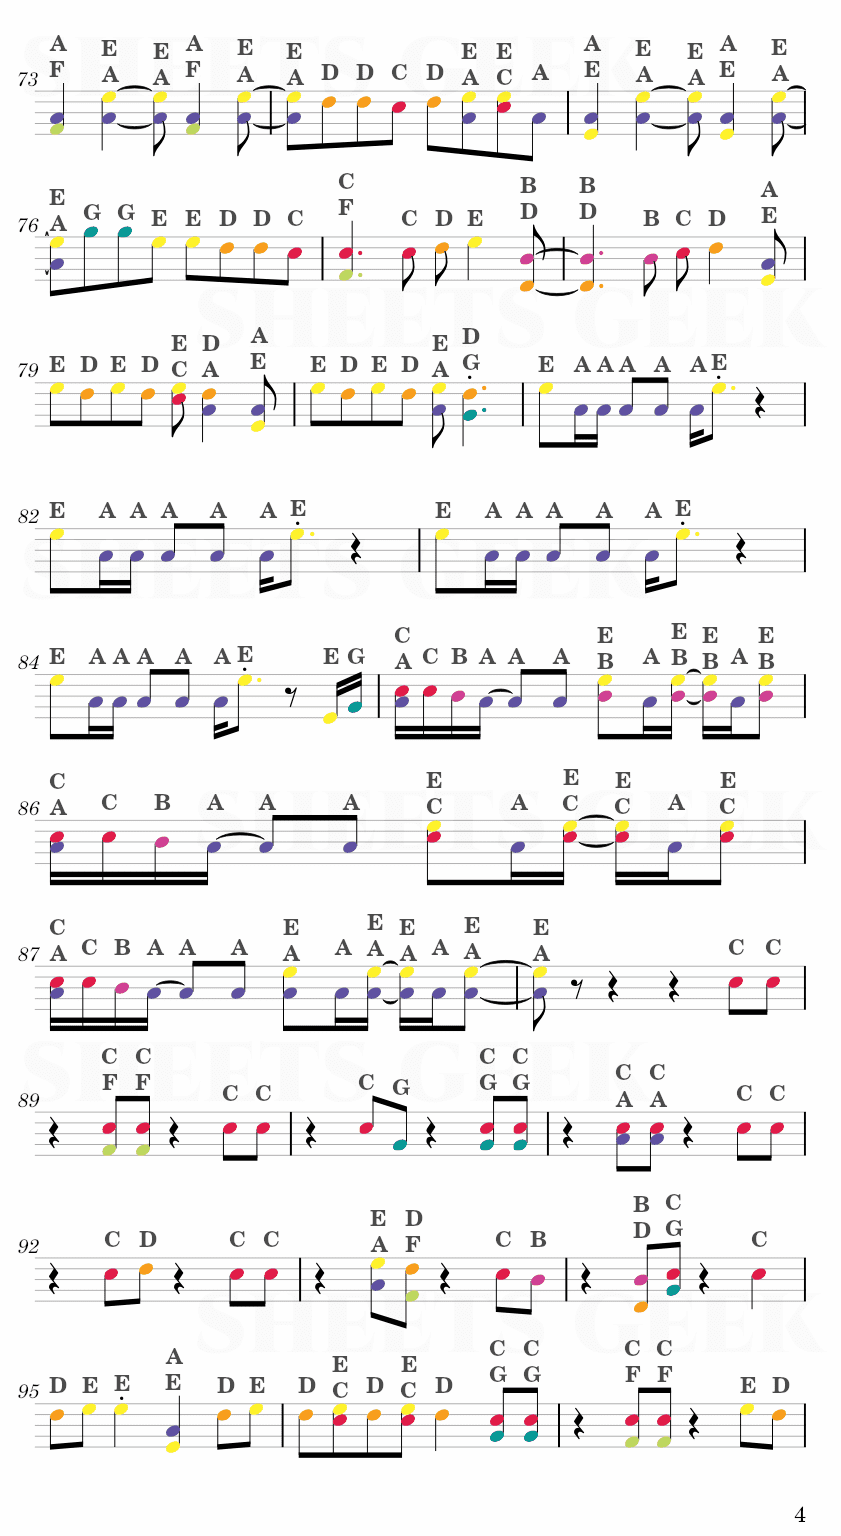 Fallin' Flower - SEVENTEEN Easy Sheet Music Free for piano, keyboard, flute, violin, sax, cello page 4